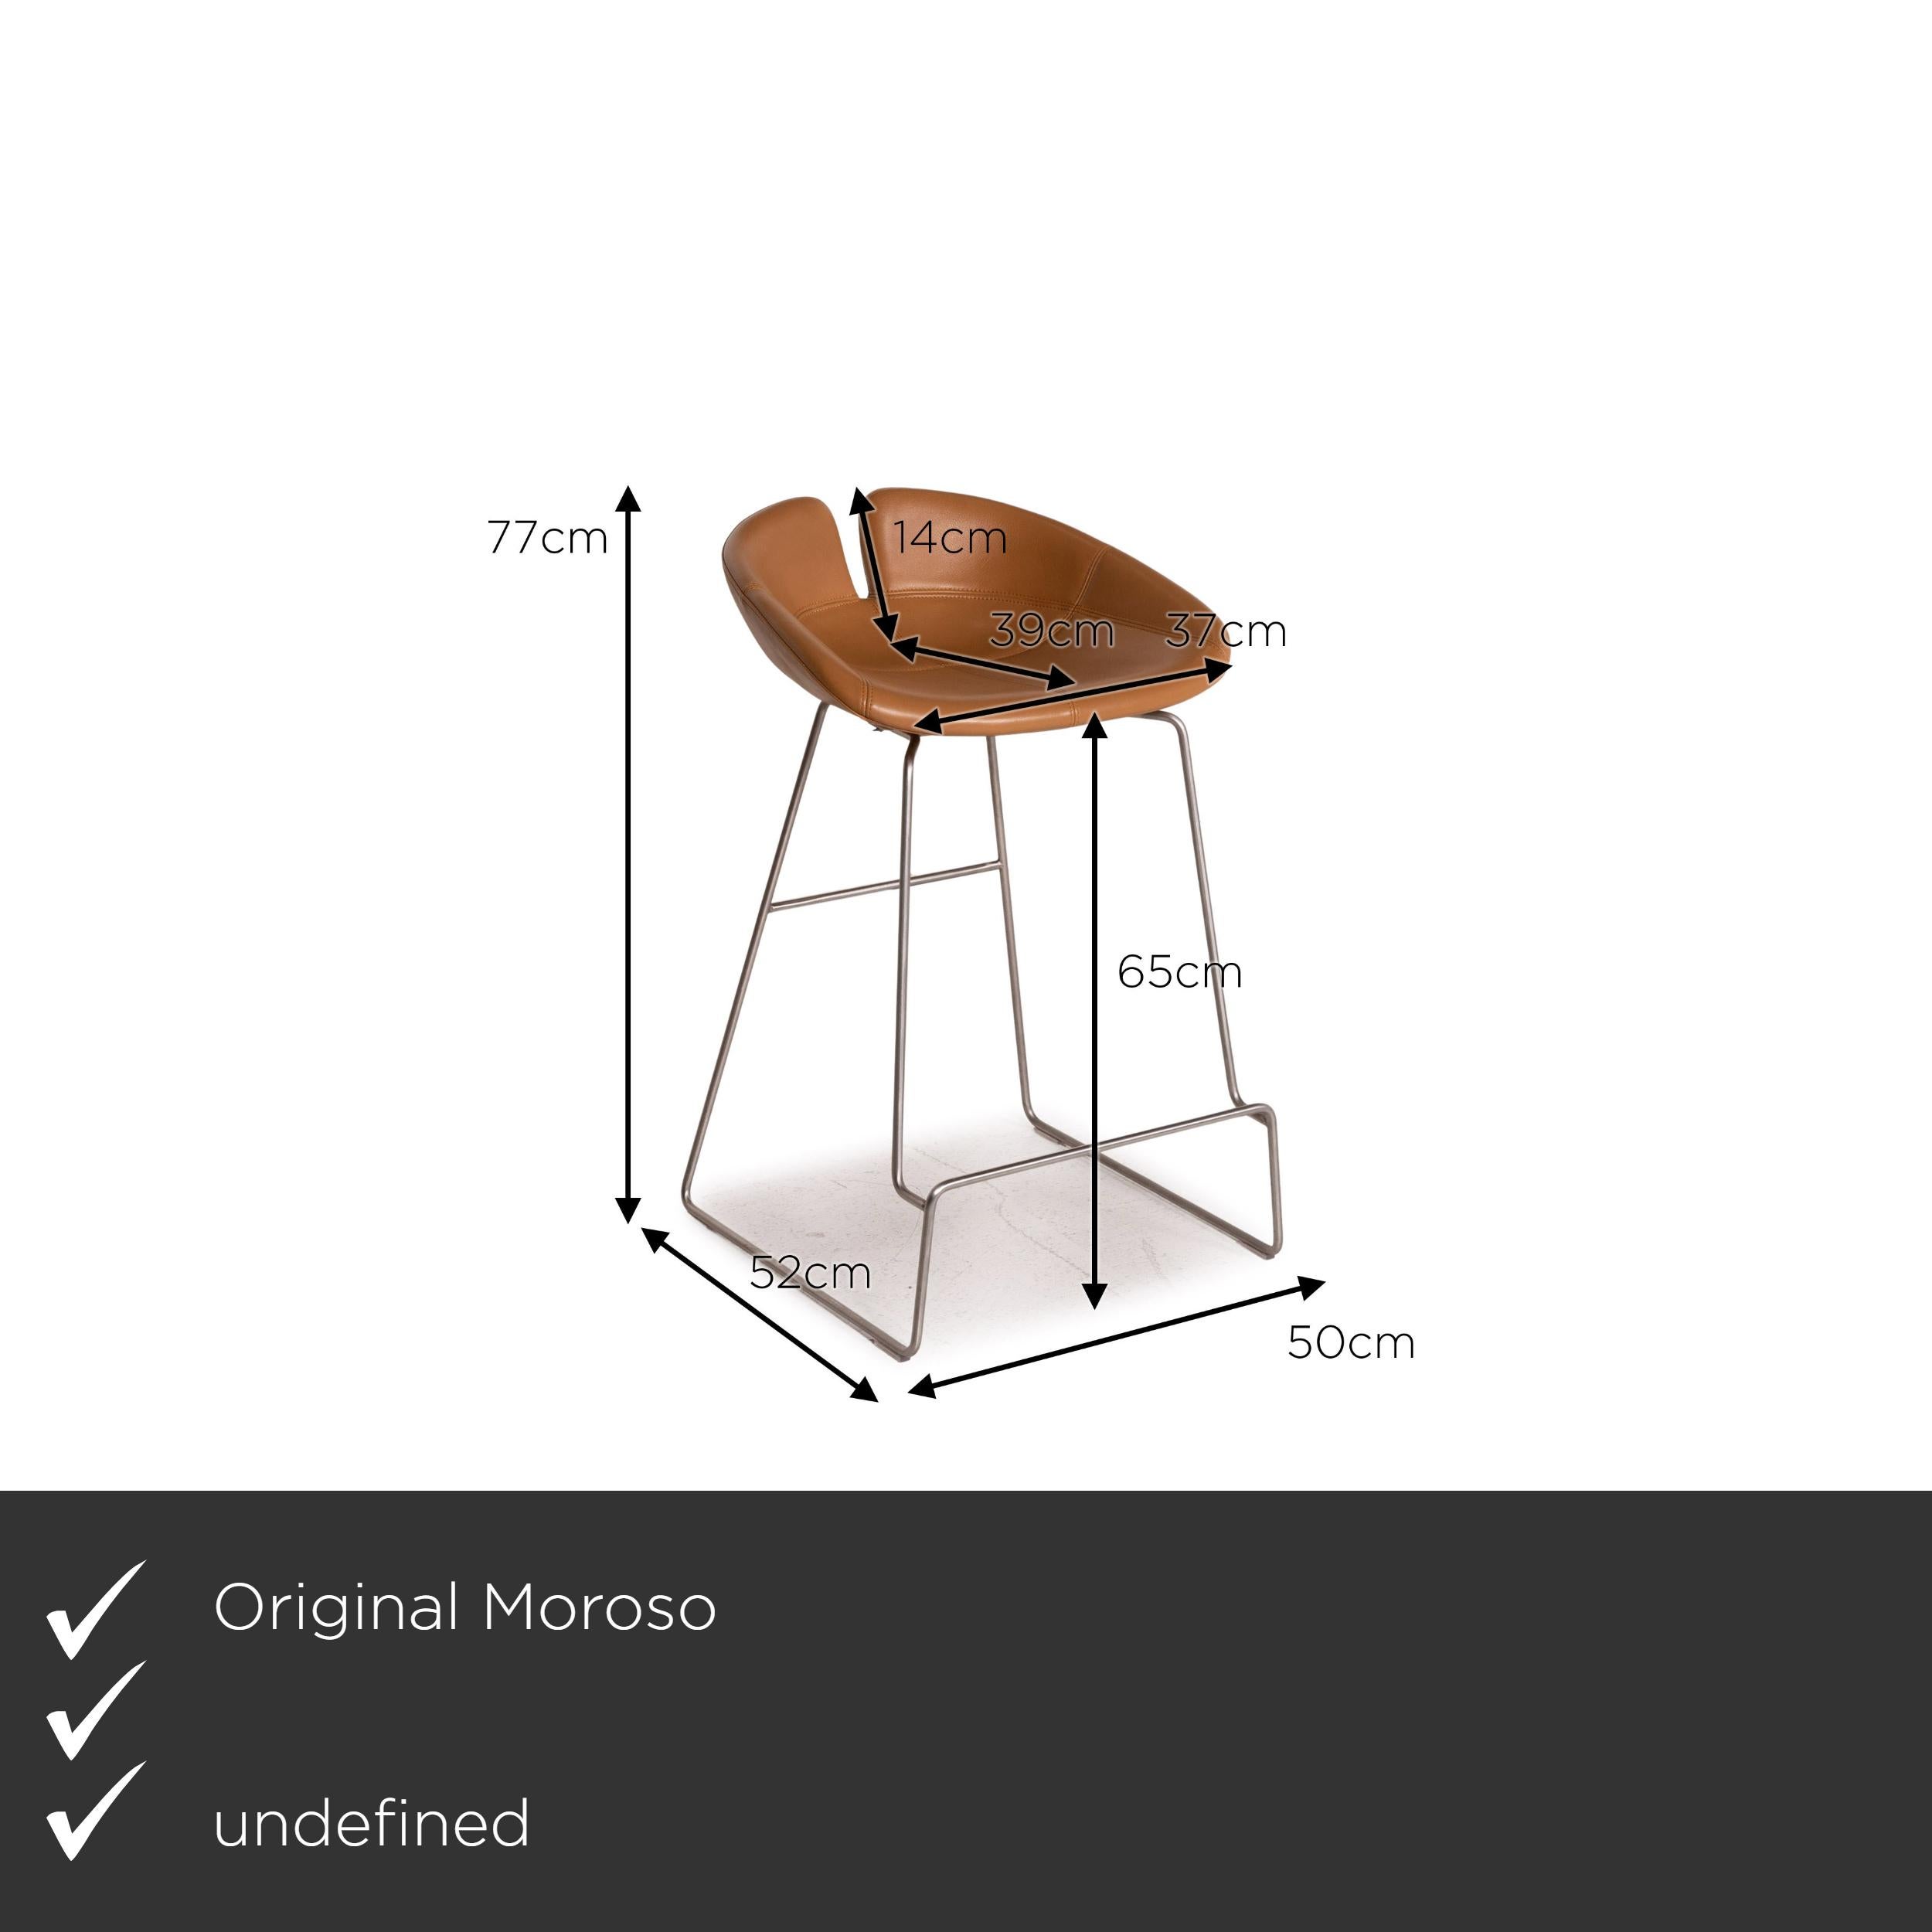 We present to you a Moroso Fjord leather bar stool set cognac brown 2x chair.

Product measurements in centimeters:

Depth 52
Width 50
Height 77
Seat height 65
Rest height 72
Seat depth 39
Seat width 37.
 
 
 
   